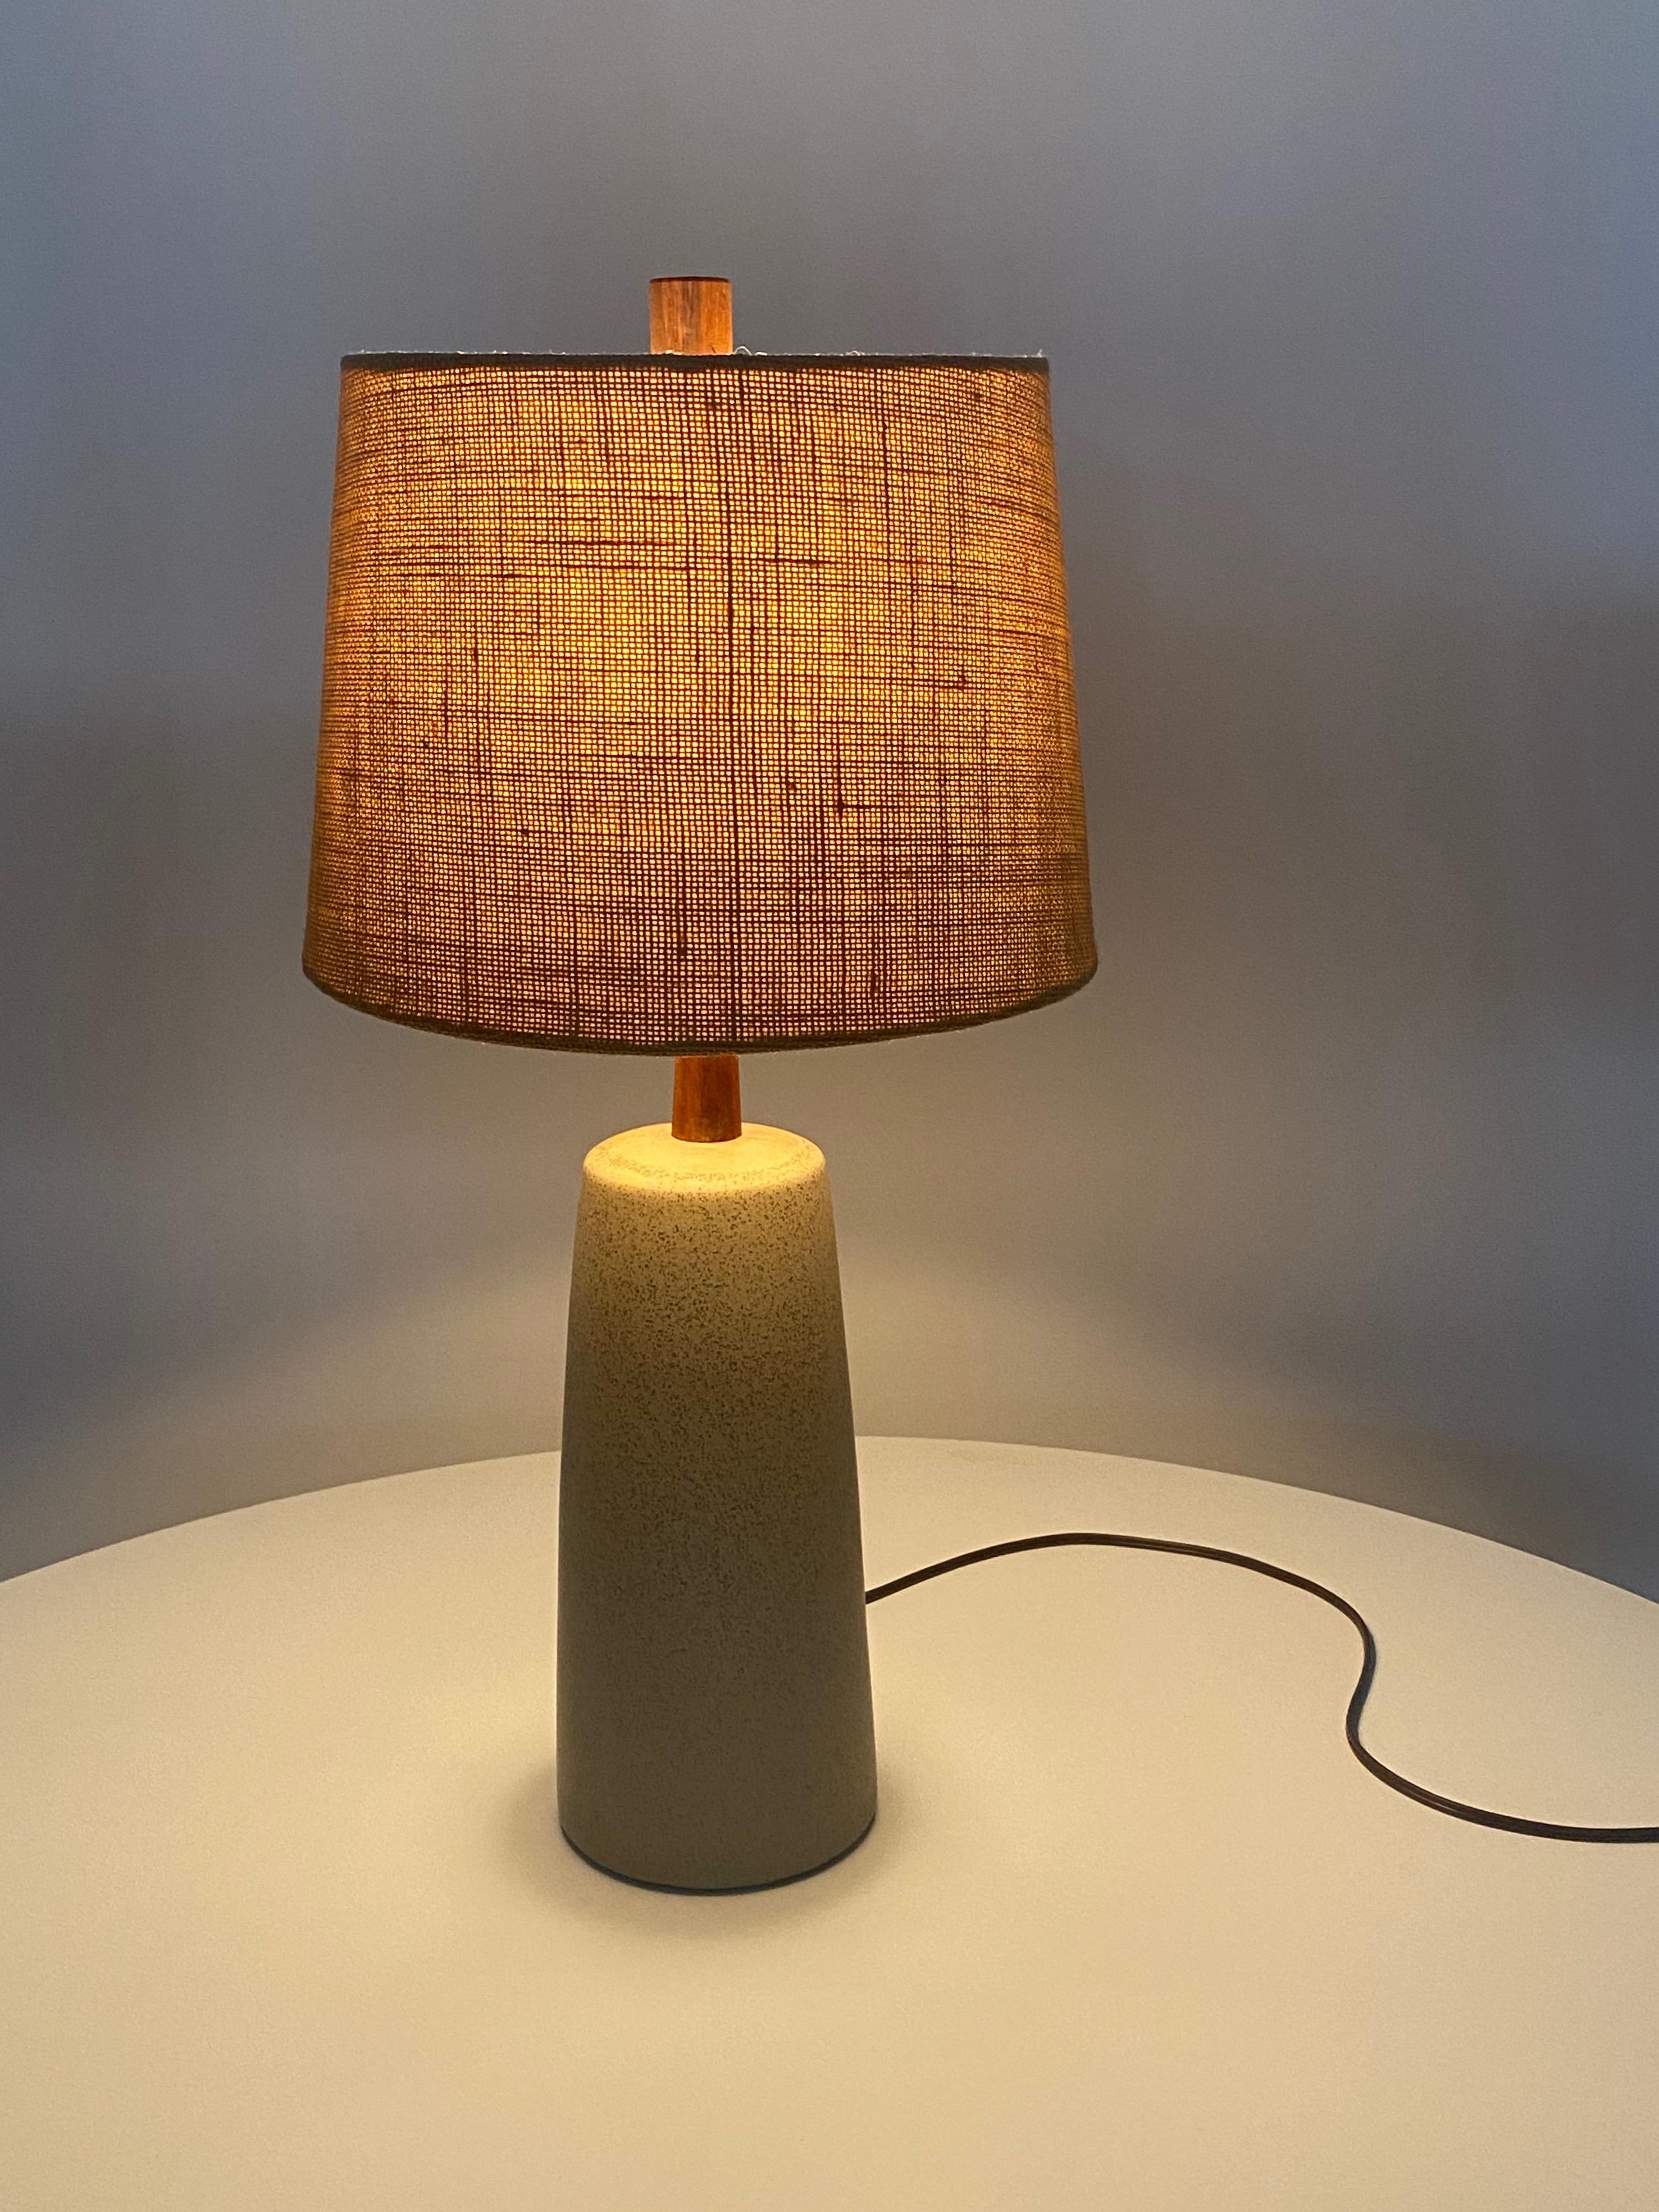 Ceramic table lamp in a light earthtone brown with dark brown speckles, with orignial teak finial and neck, created by Jane and Gordon Martz for their company, Marshall Studios. The lamp is signed on the back by the lamp cord exit, Martz. Comes with